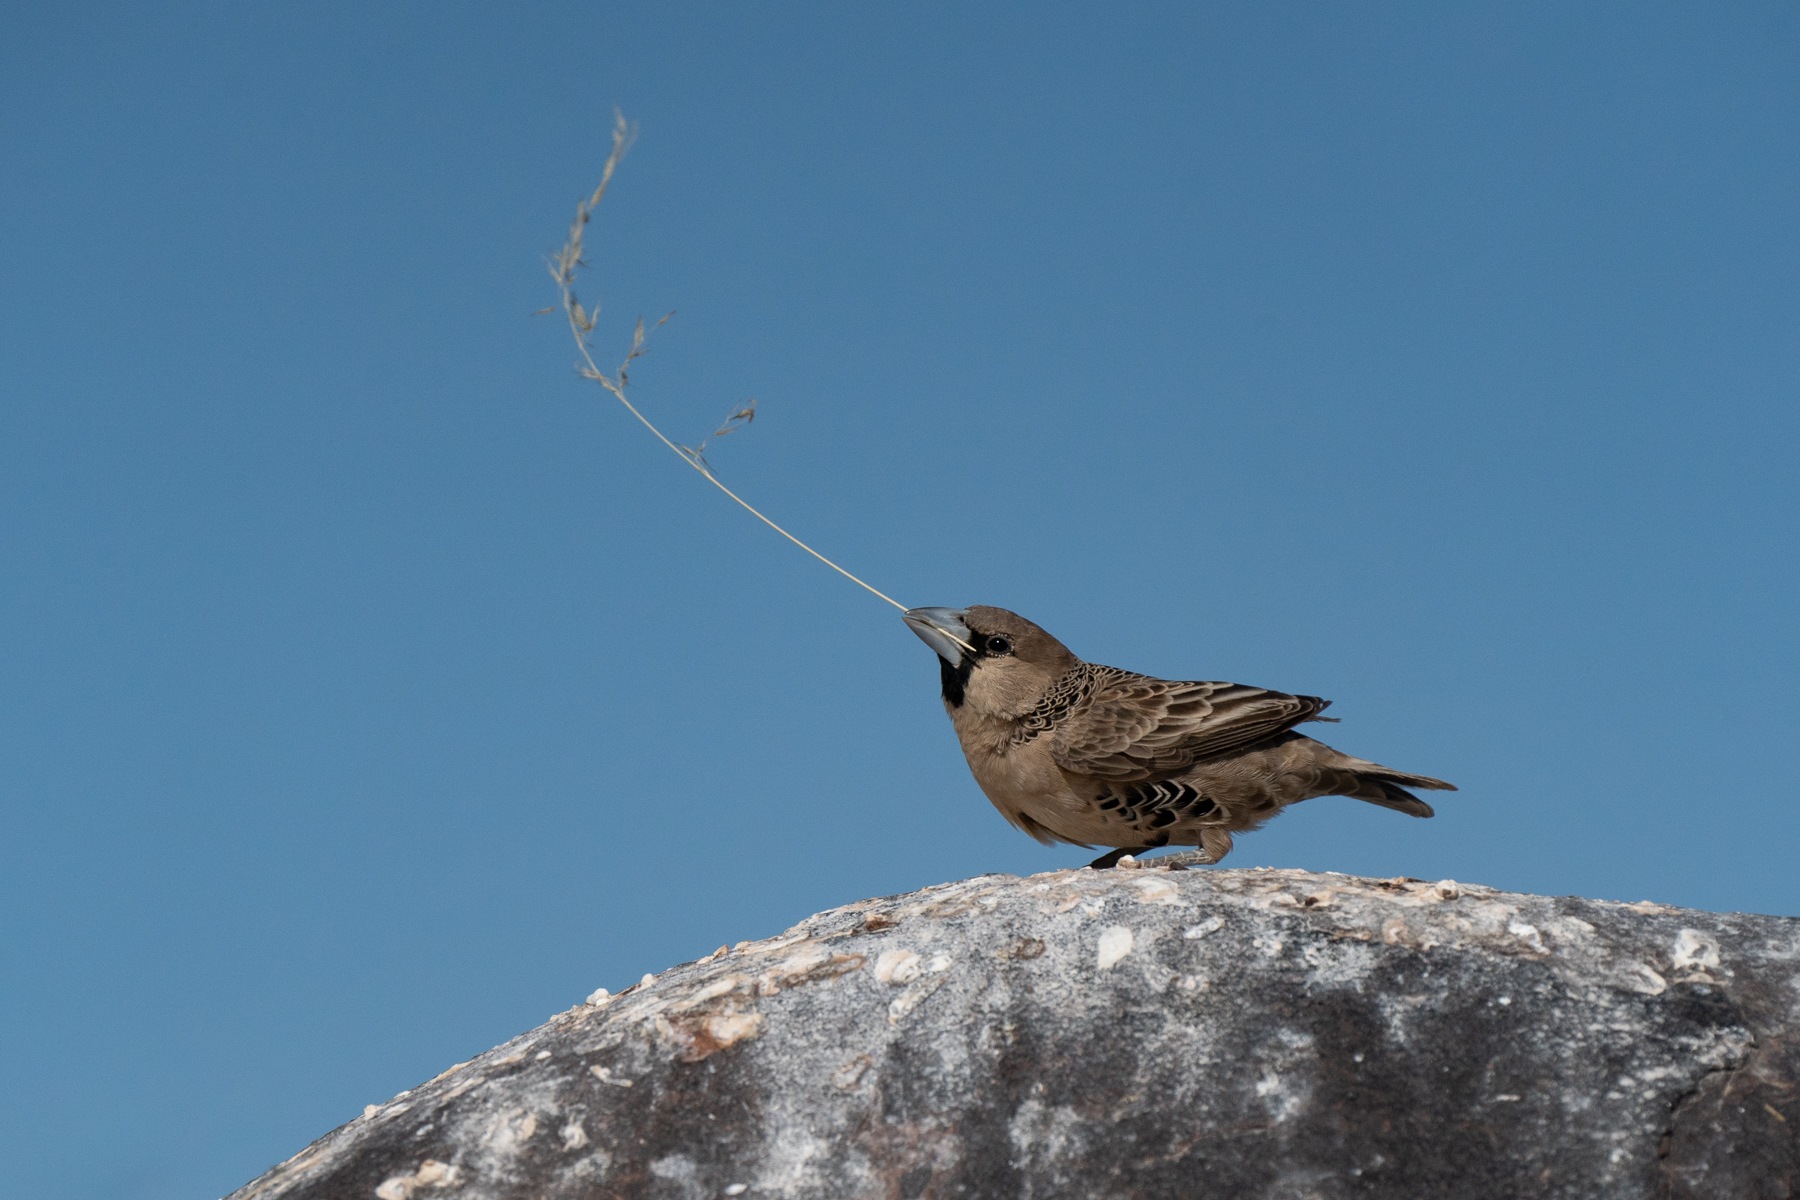 A Sociable Weaver struggles to hold on to nesting material in a stiff breeze